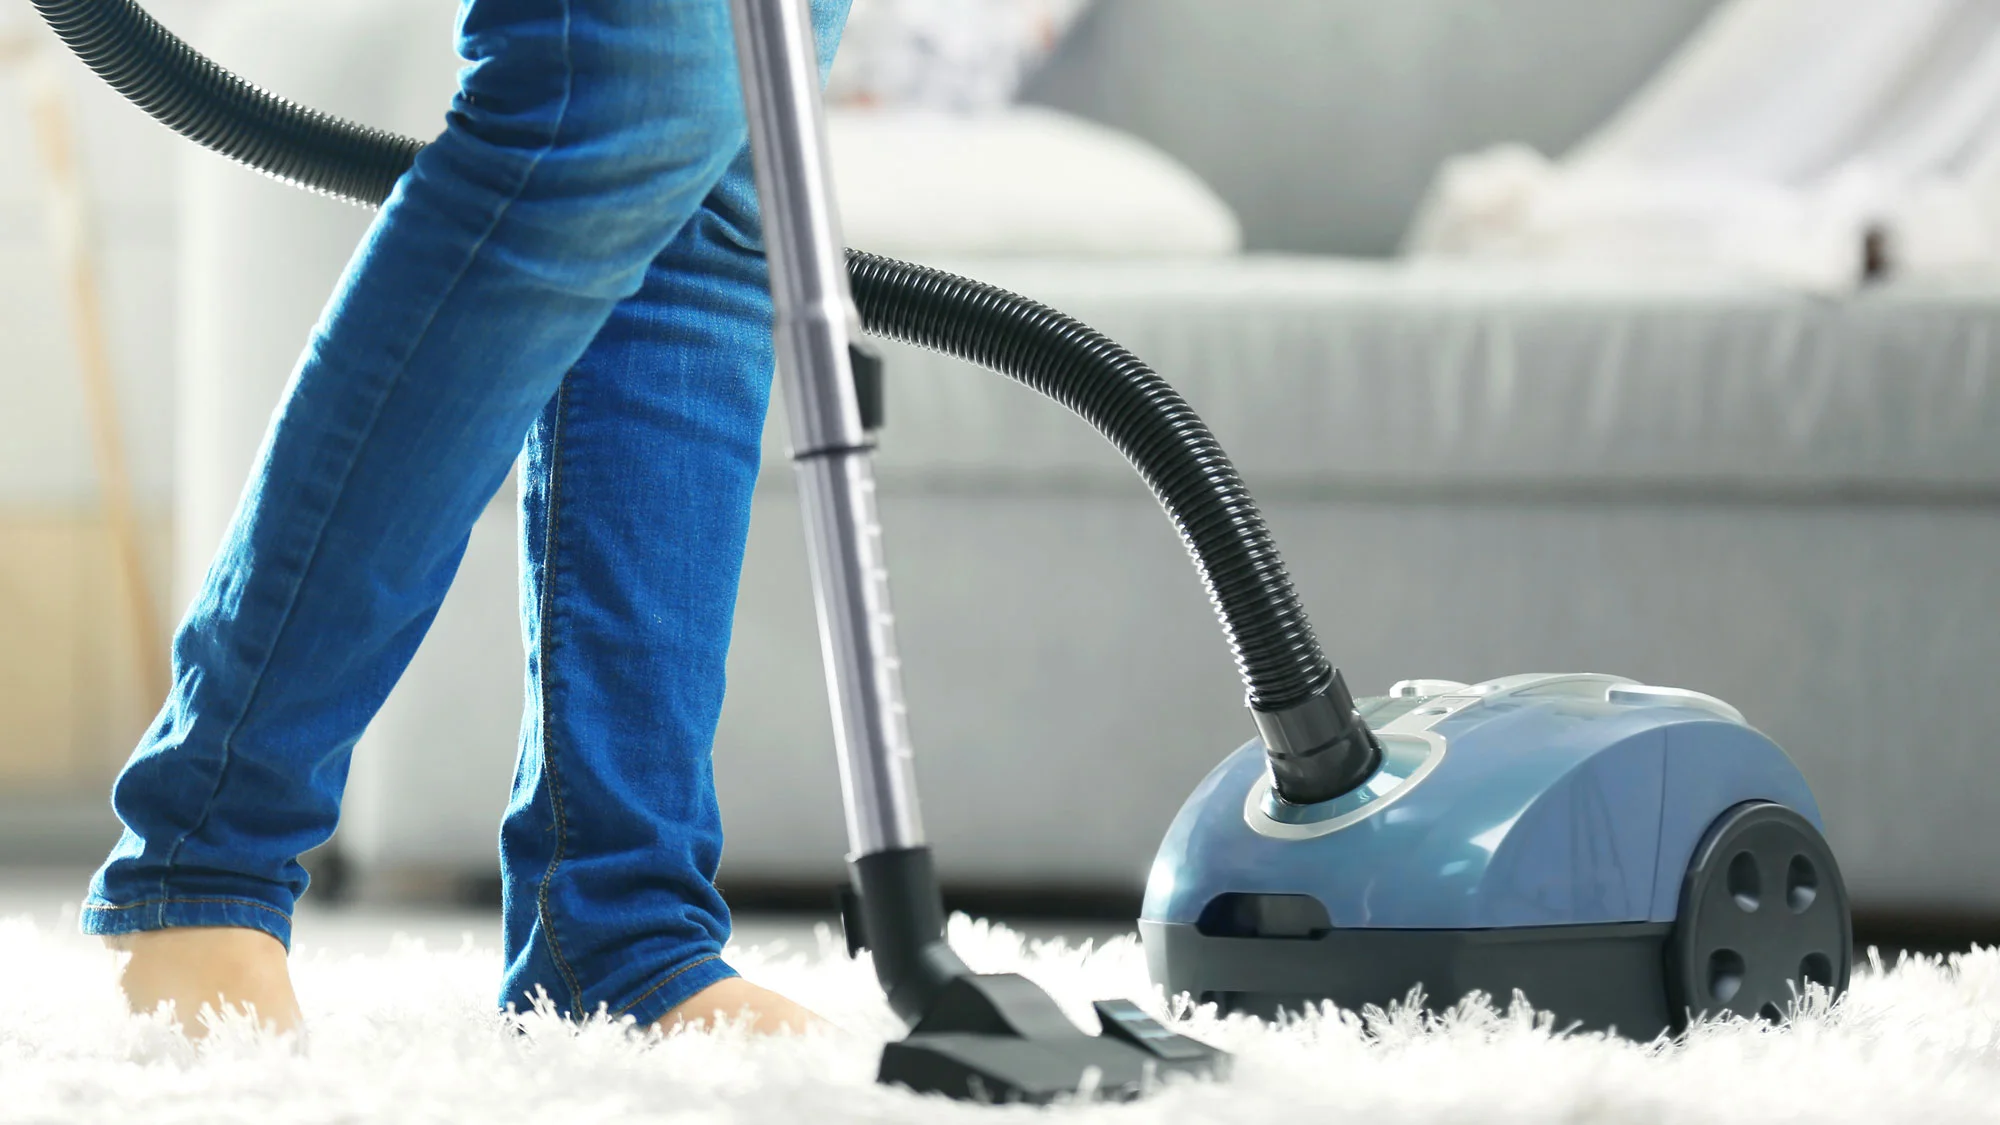 10 Tips For Wonderful Carpet Cleaning Like A Pro